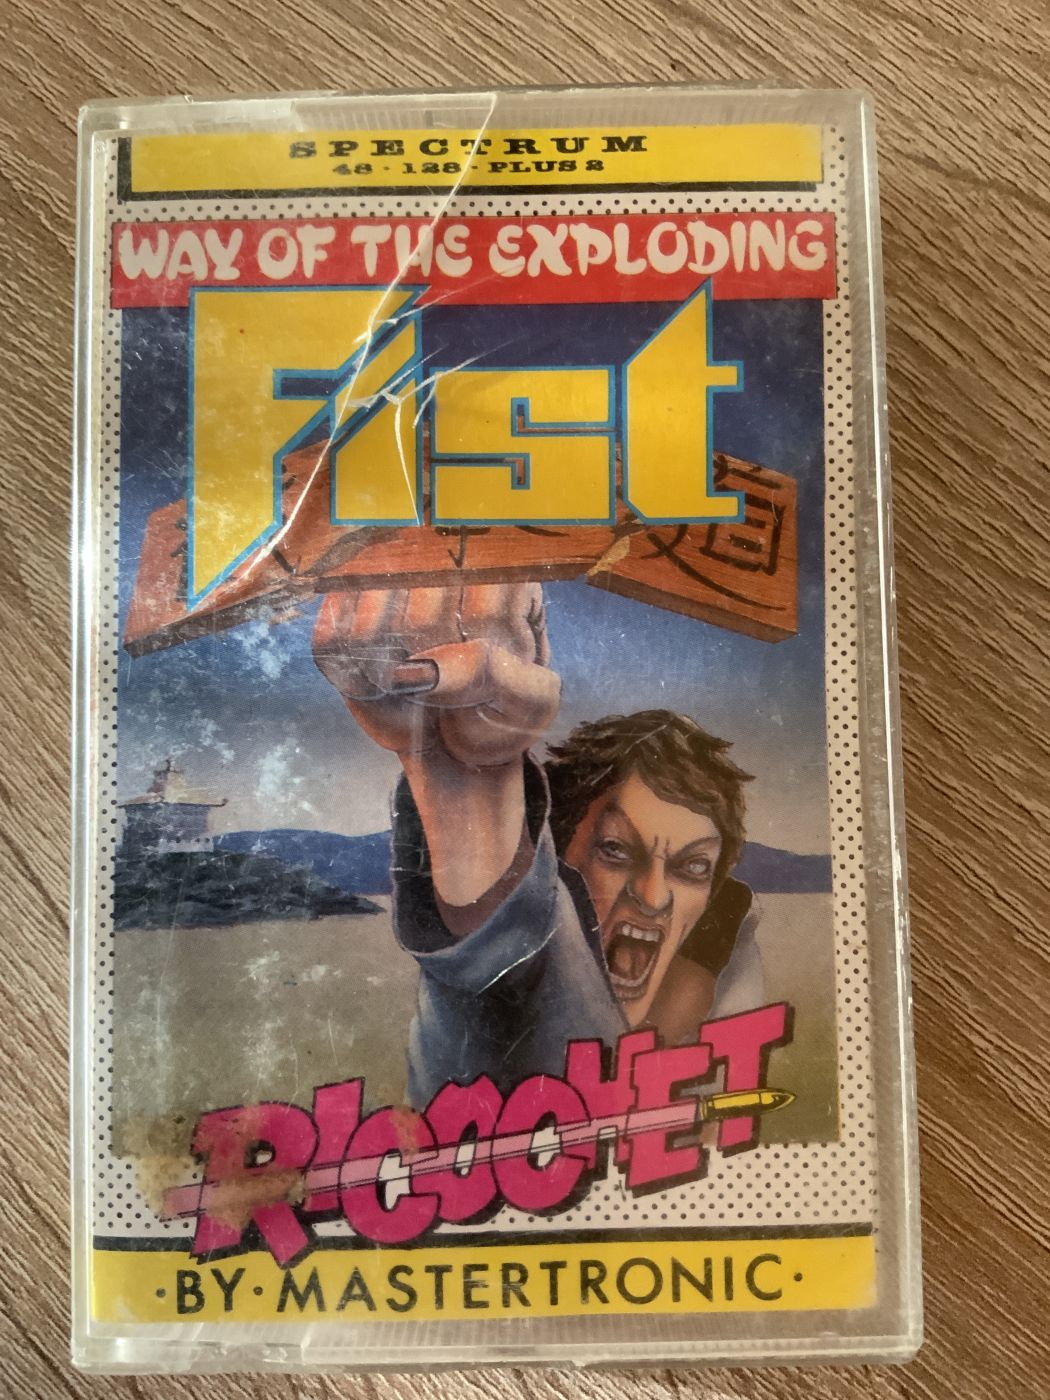 Way Of The Exploding Fist